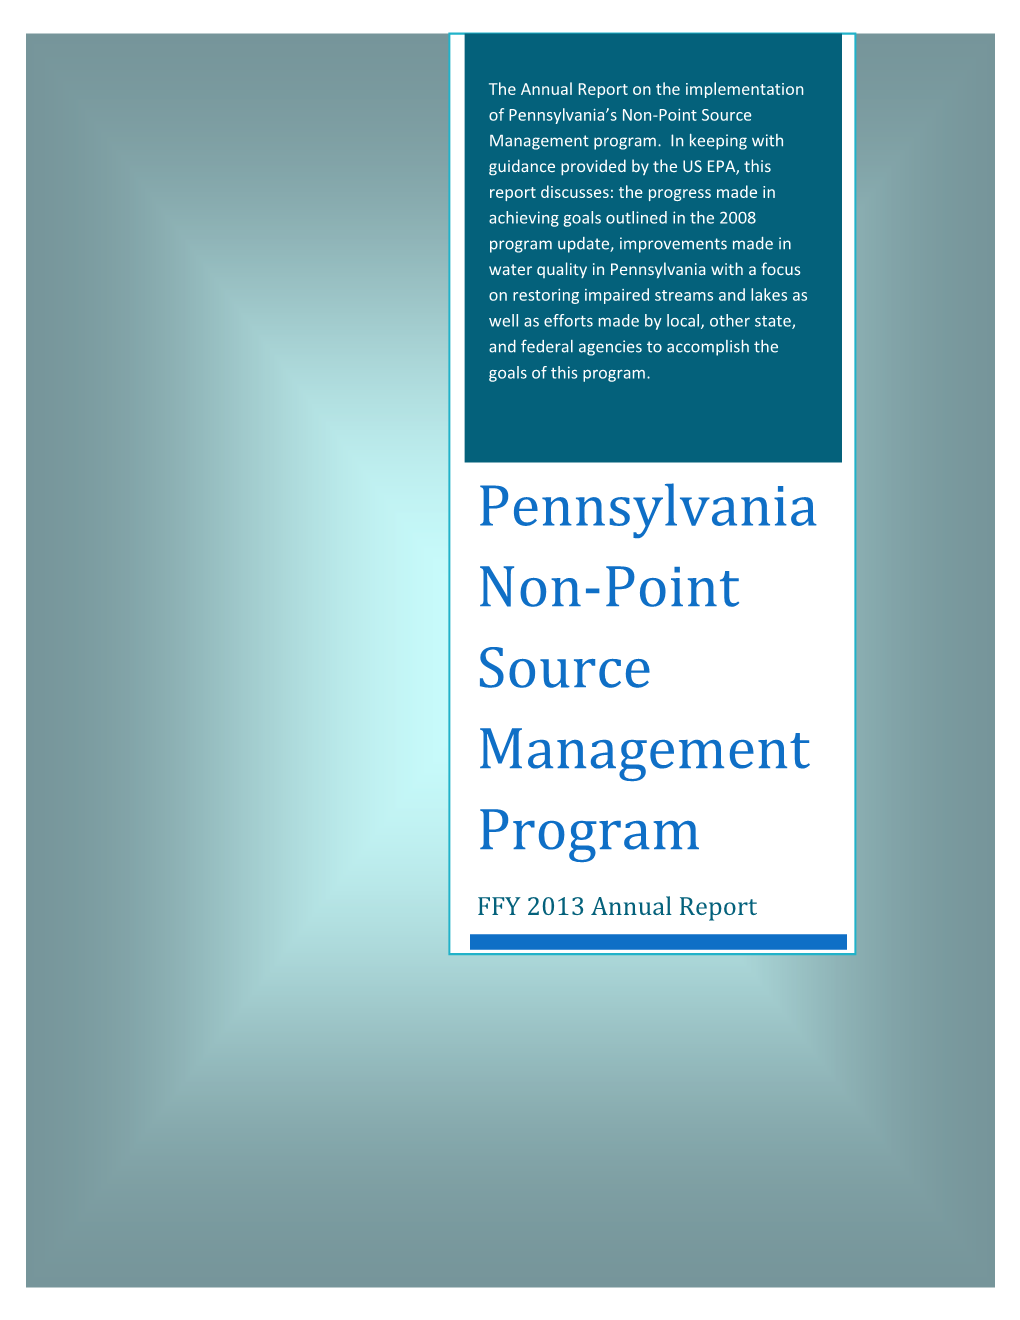 FY2013 Nonpoint Source Annual Report